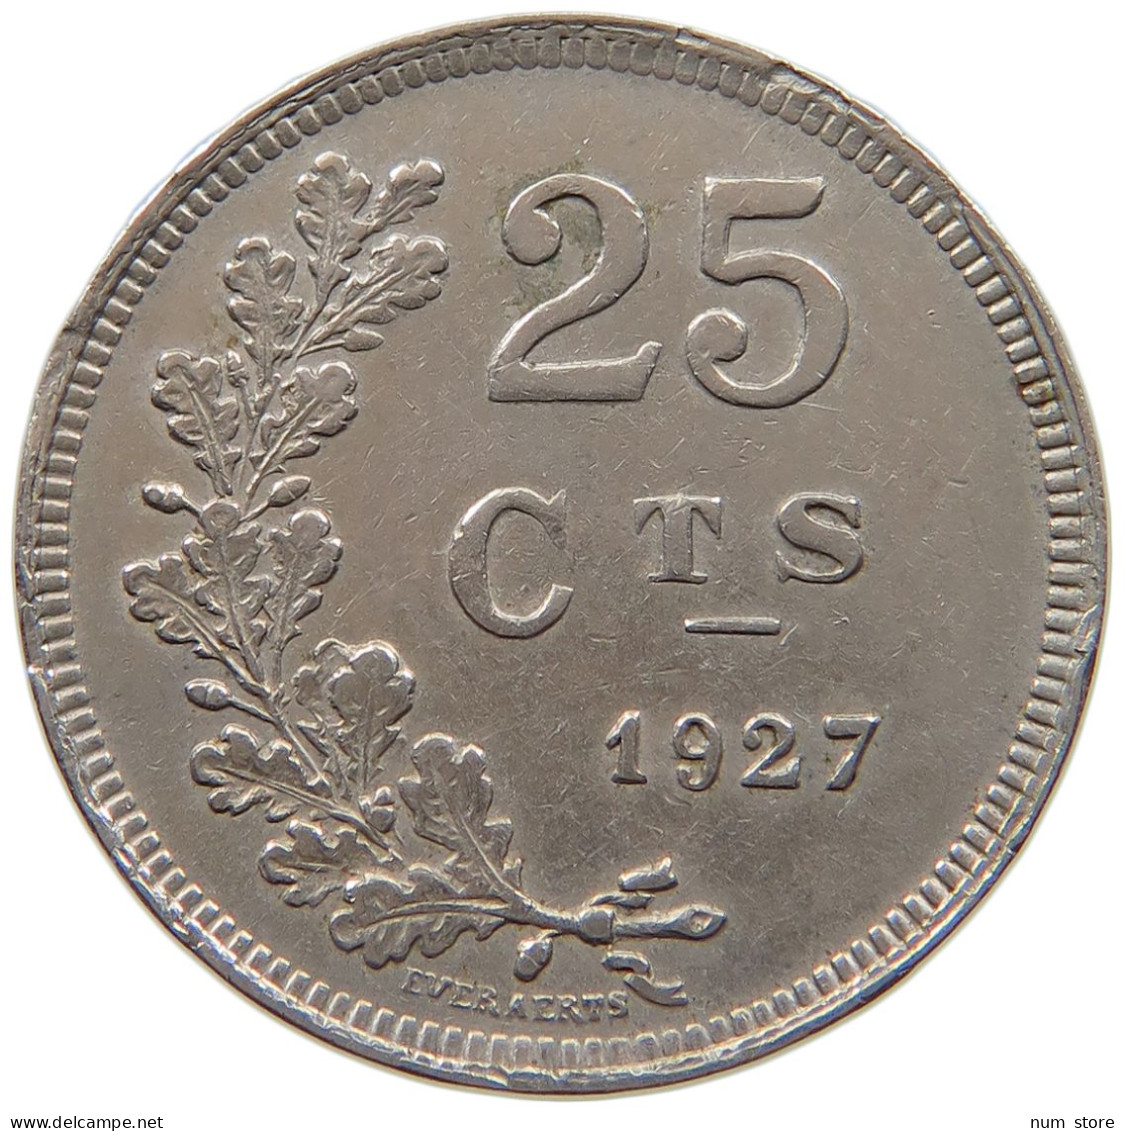 LUXEMBOURG 25 CENTIMES 1927 #a045 1169 - Luxembourg